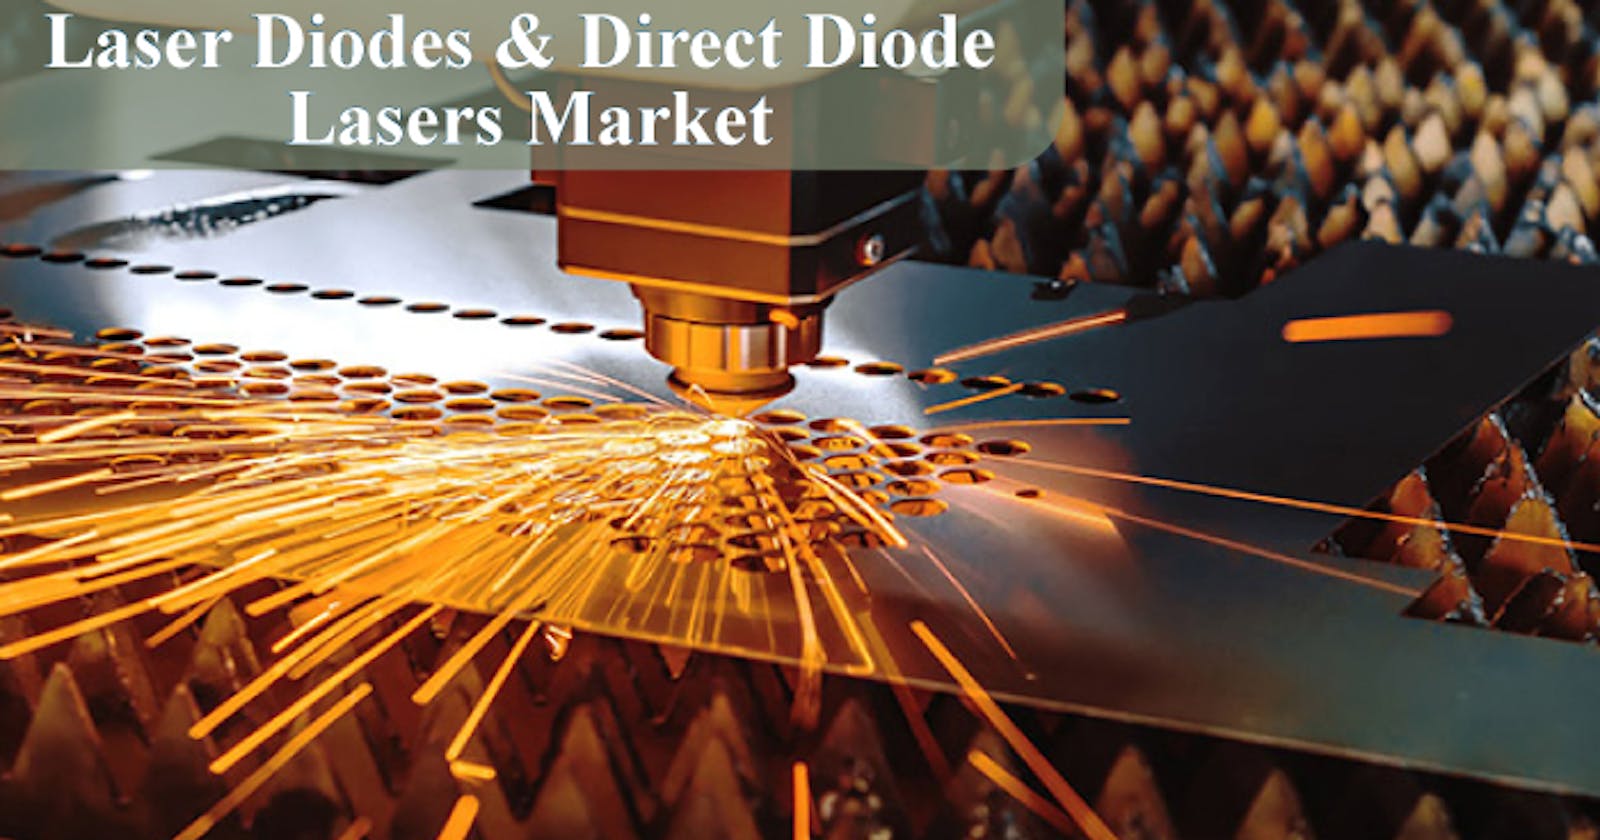 Laser Diodes & Direct Diode Lasers Market Anticipates Exceptional Growth at a 12.4% CAGR, Projected to Surpass US$21.5 Billion by 2030